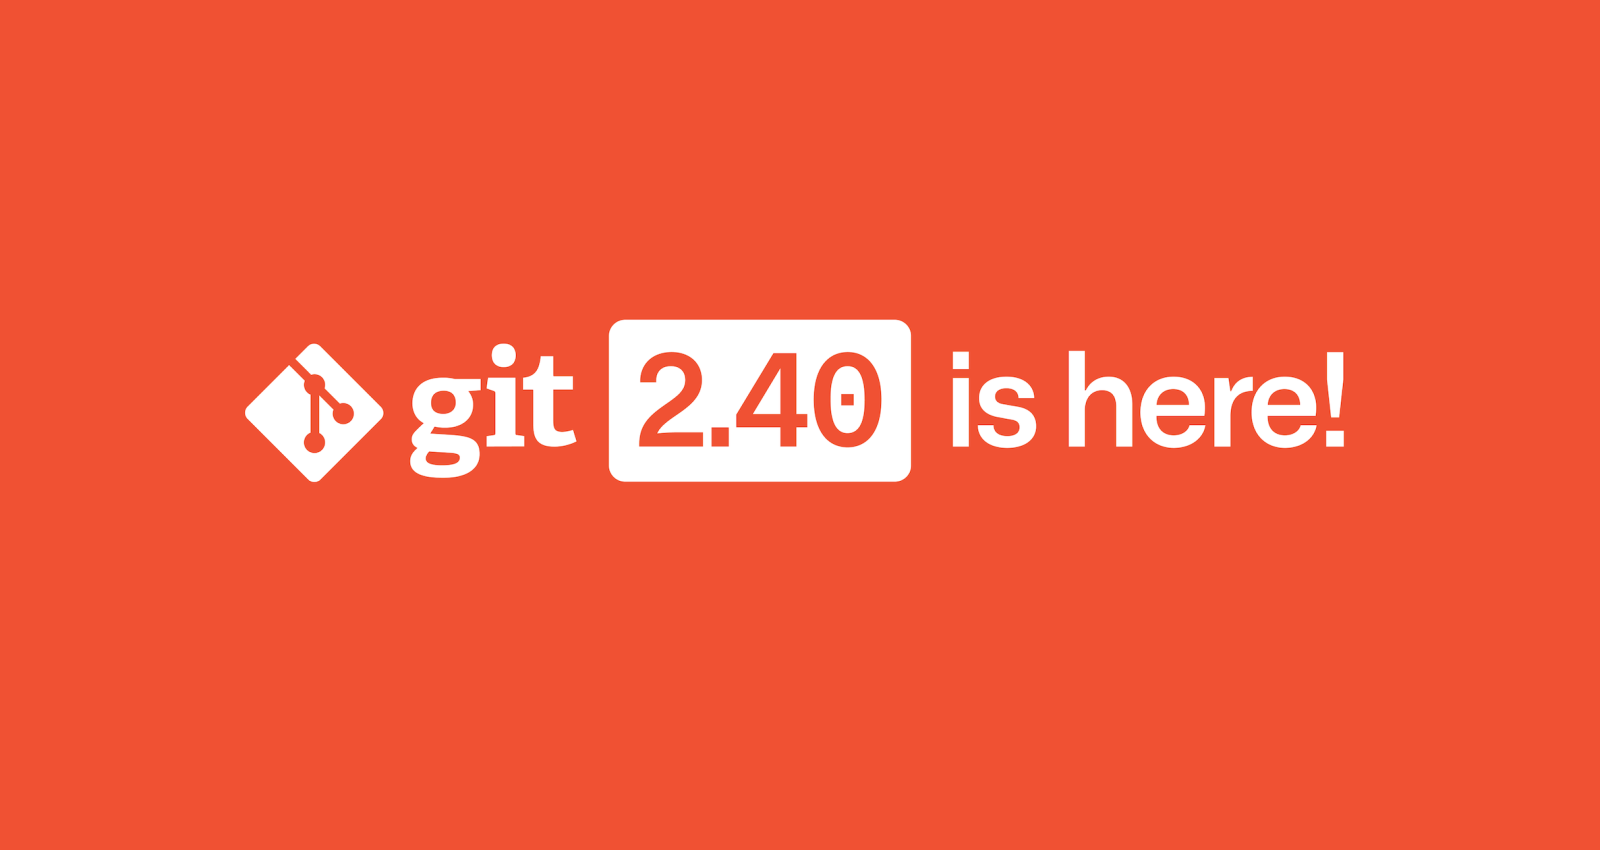 Highlights from Git 2.40